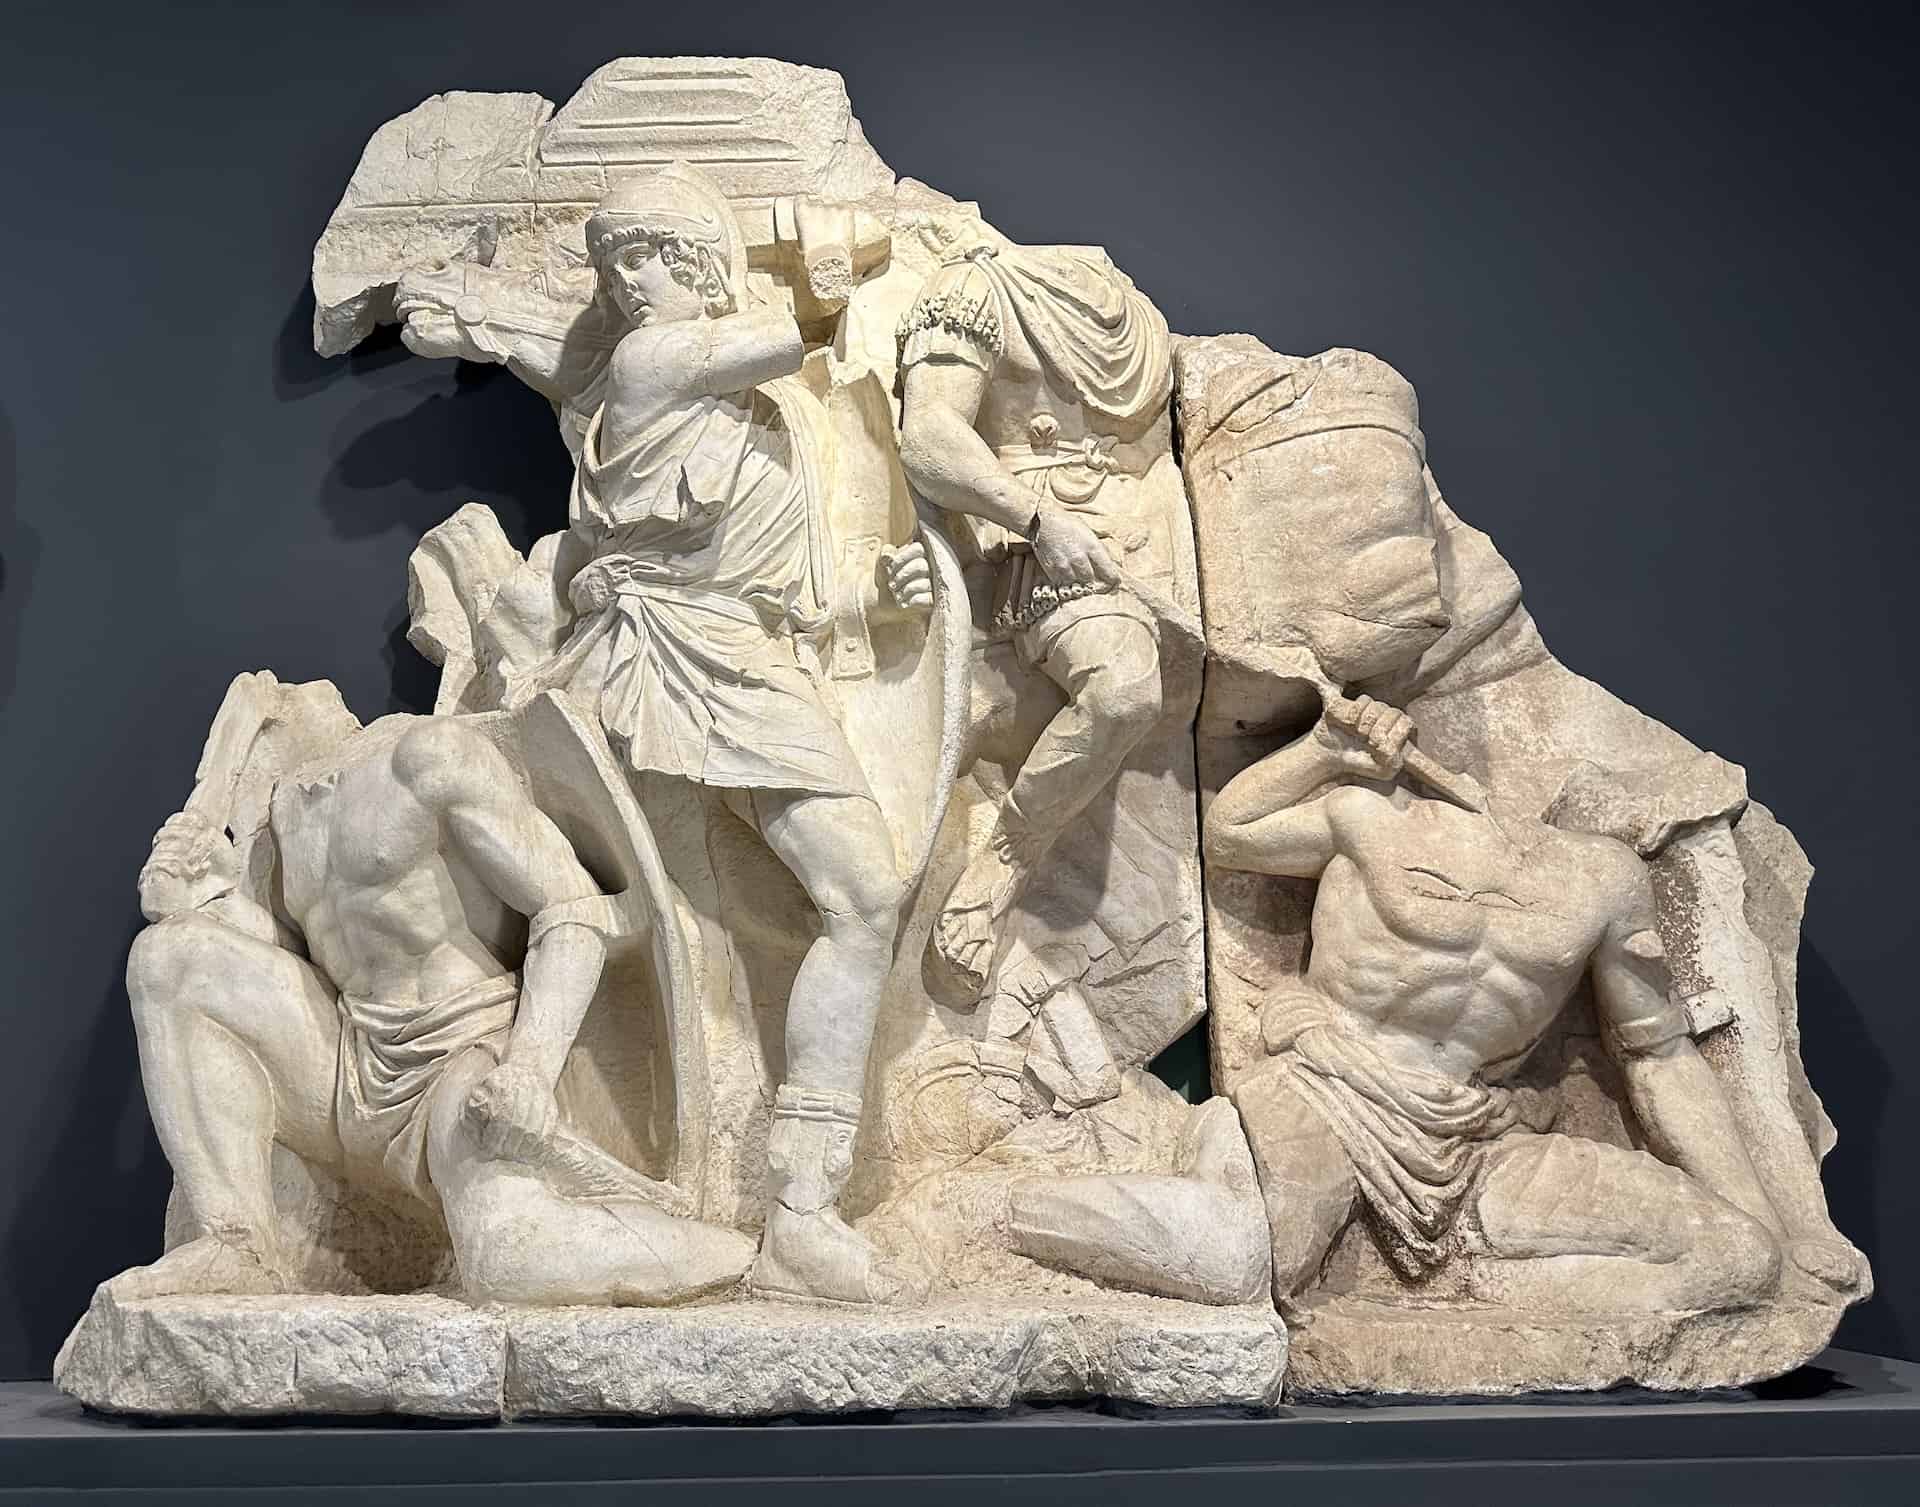 Roman soldiers fighting the Parthians from the Parthian Monument at the Ephesus Museum in Selçuk, Turkey